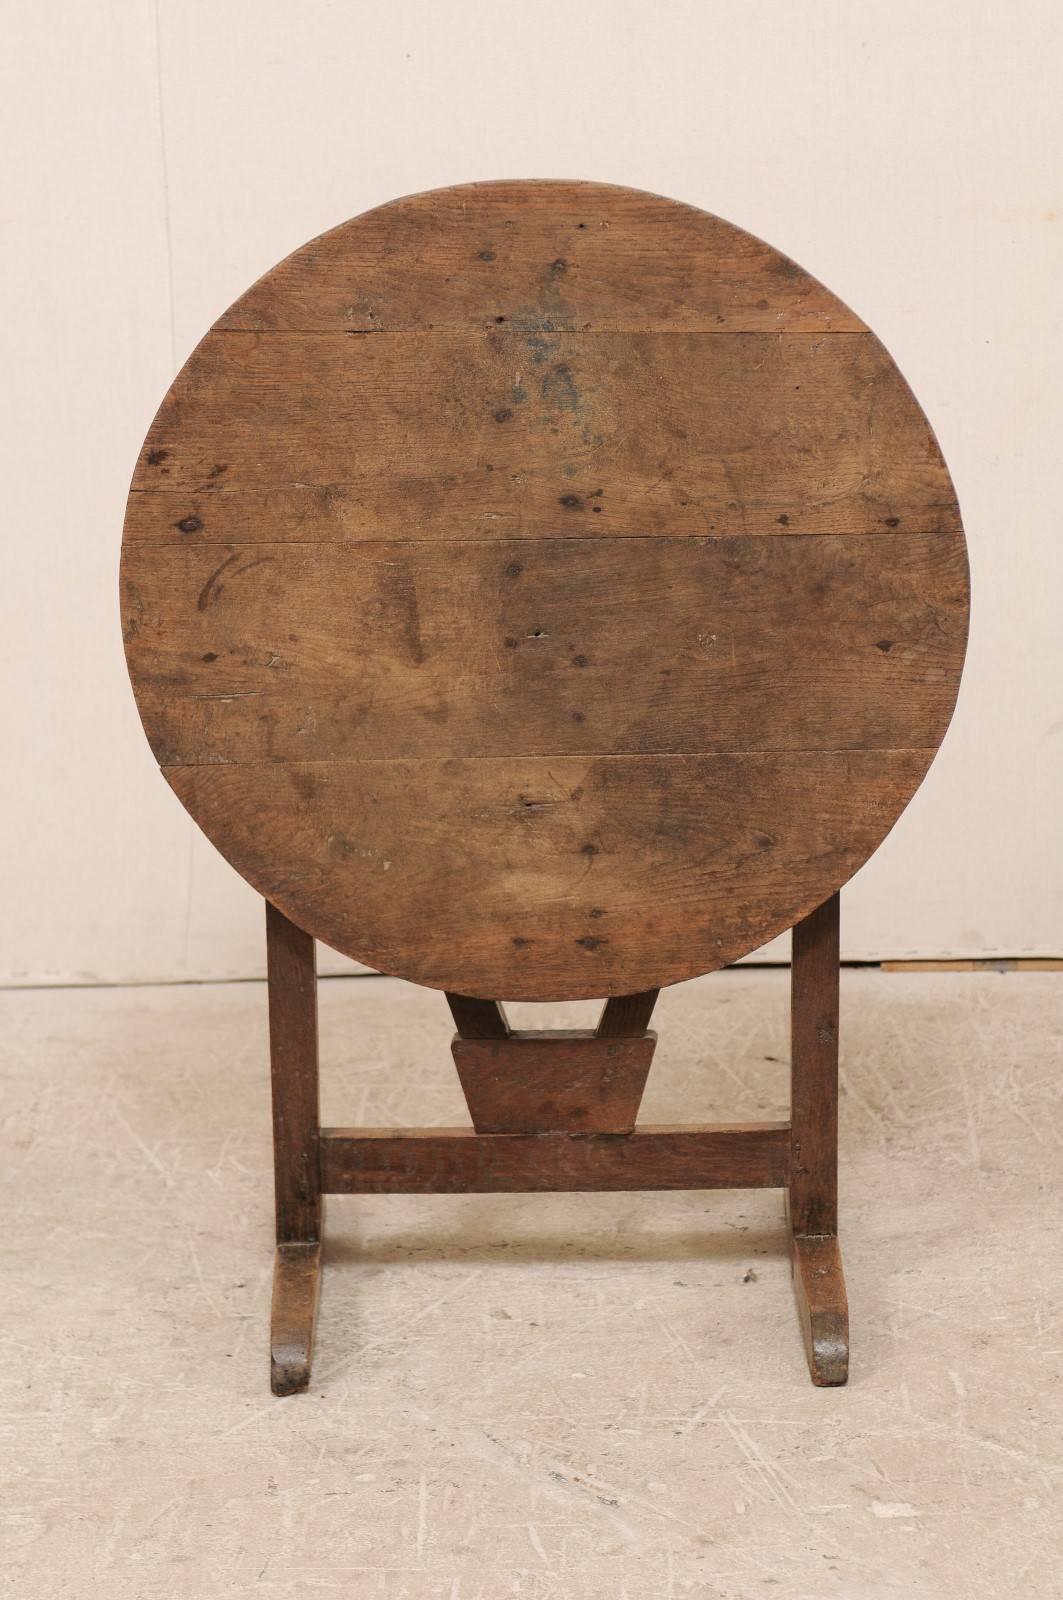 A French 20th century wine tasting table. This round shaped French wine tasting table features the typical tilt top, and butterfly wedge turn which supports the top. This table has some nice wear and patina throughout, reflective of age and use.